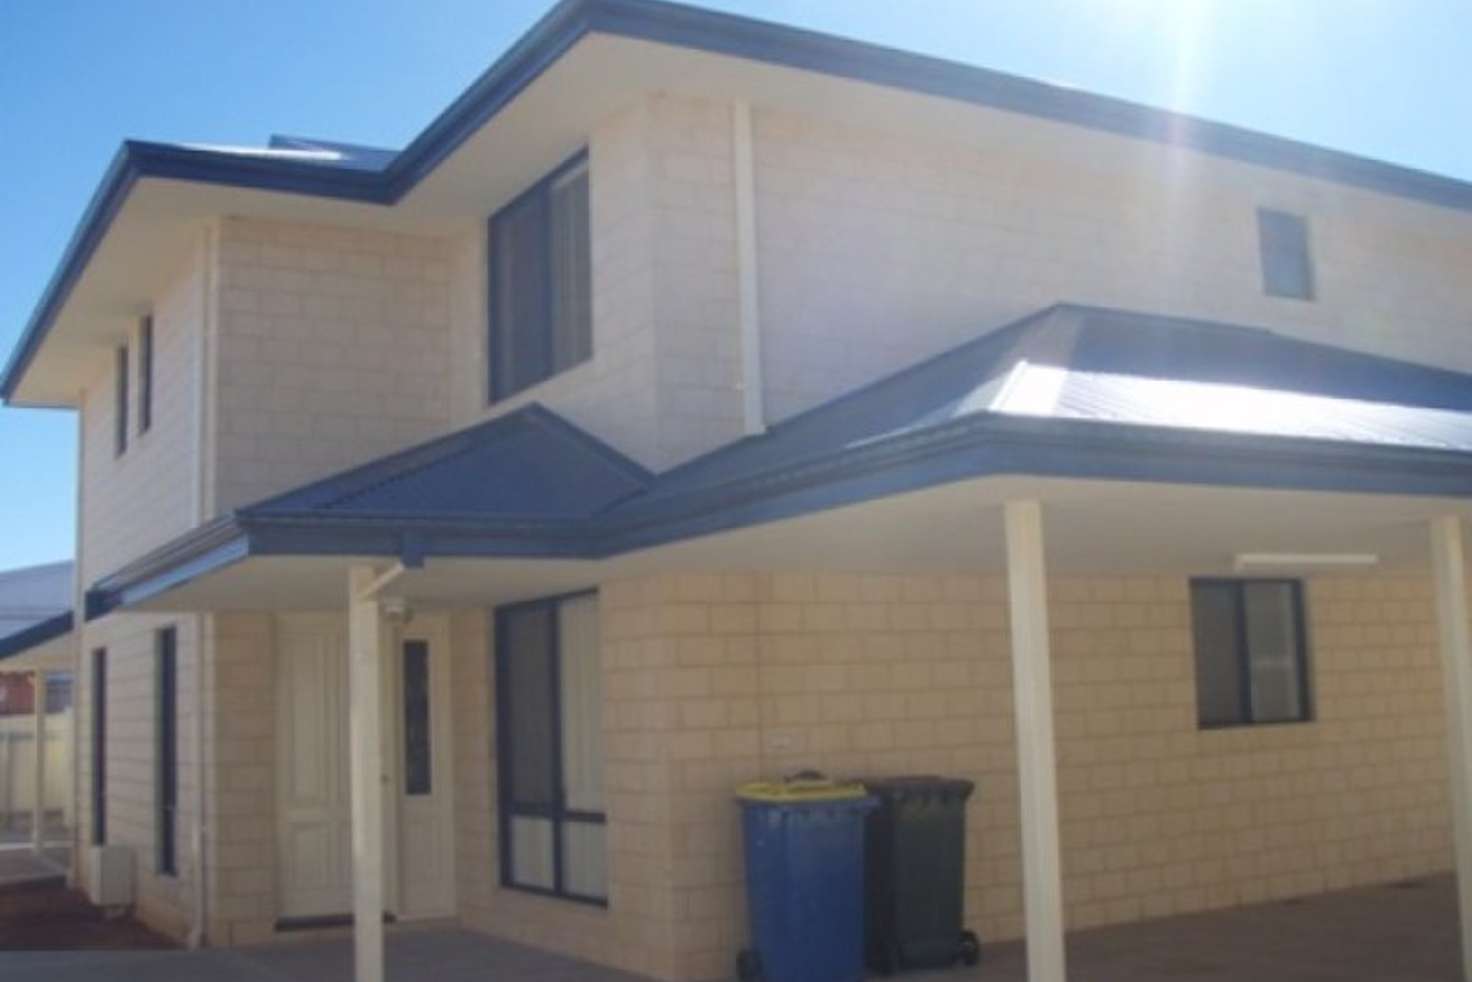 Main view of Homely townhouse listing, 2/164 Dugan, Kalgoorlie WA 6430